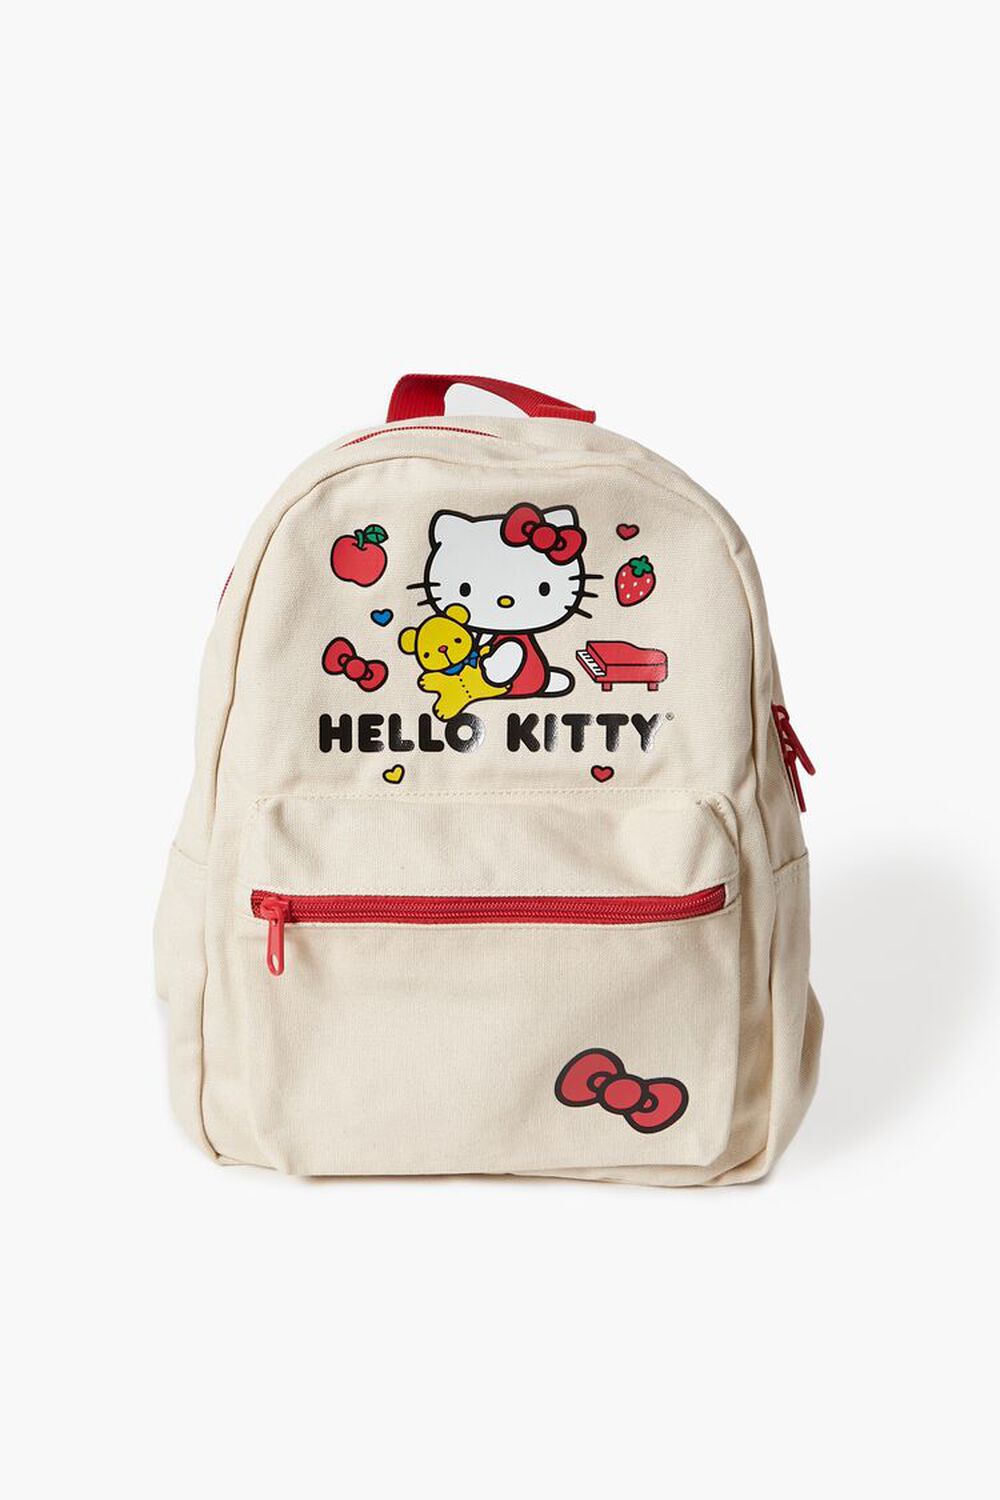 RED/TAN Girls Hello Kitty Graphic Backpack (Kids), image 1